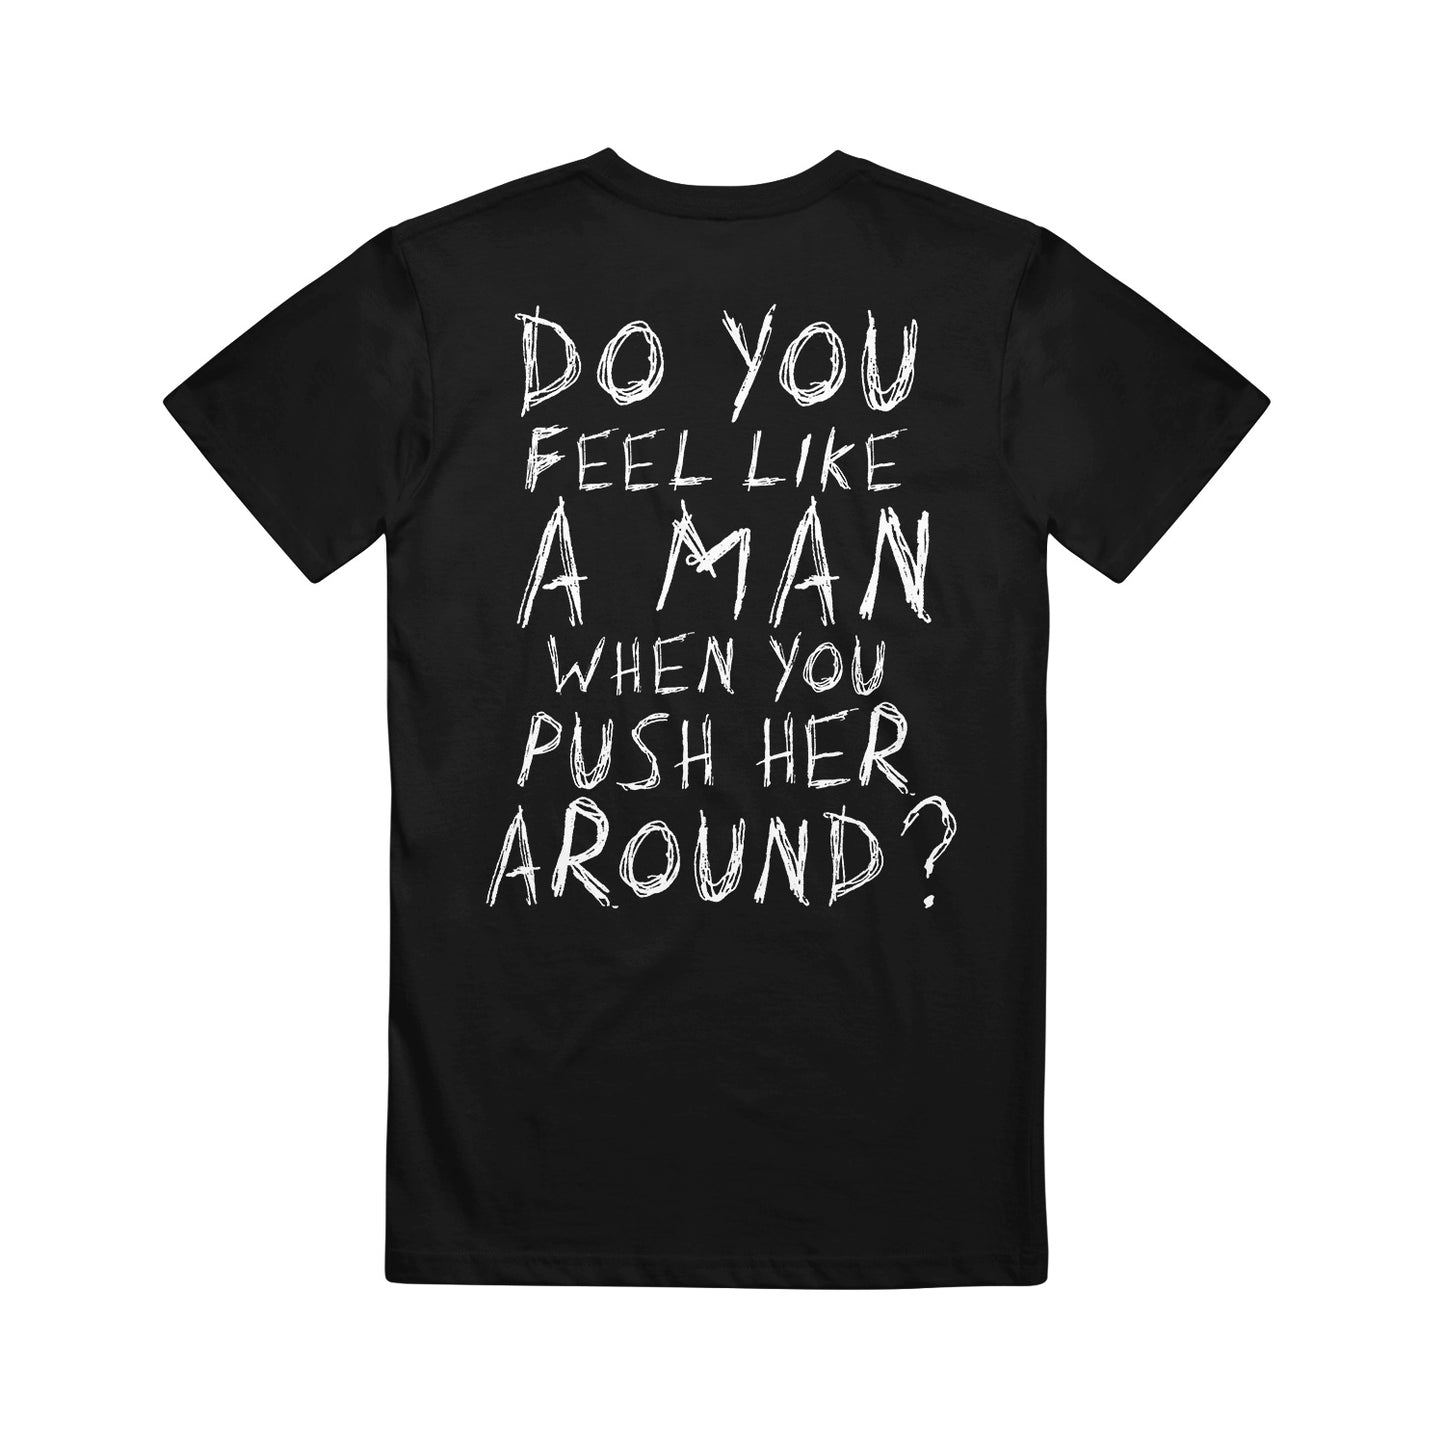 image of the back of a black tee shirt on a white background. the tee has a full back print in white that says do you feel like a man when you push her around?